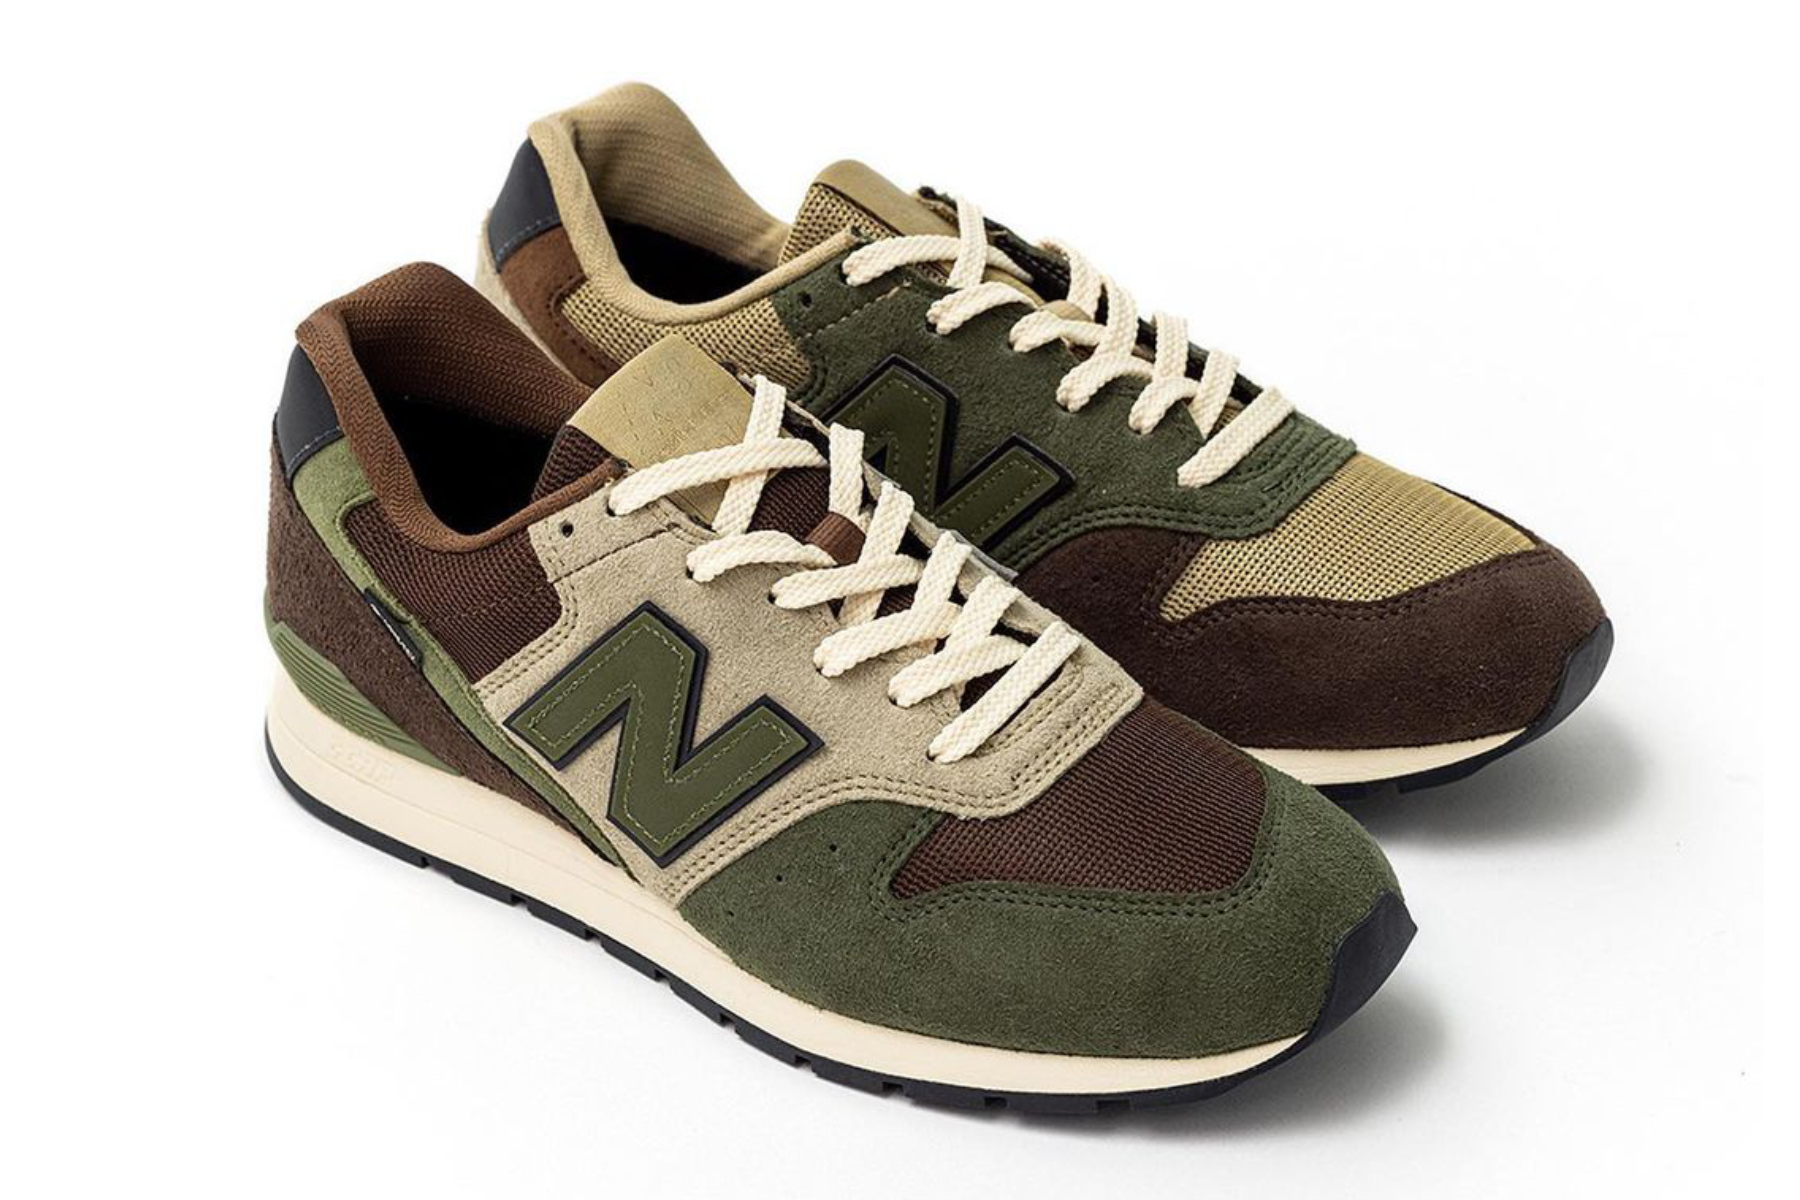 BEAMS' New Balance 996 is a perfectly autumnal GORE-TEX take on a heritage sneaker.